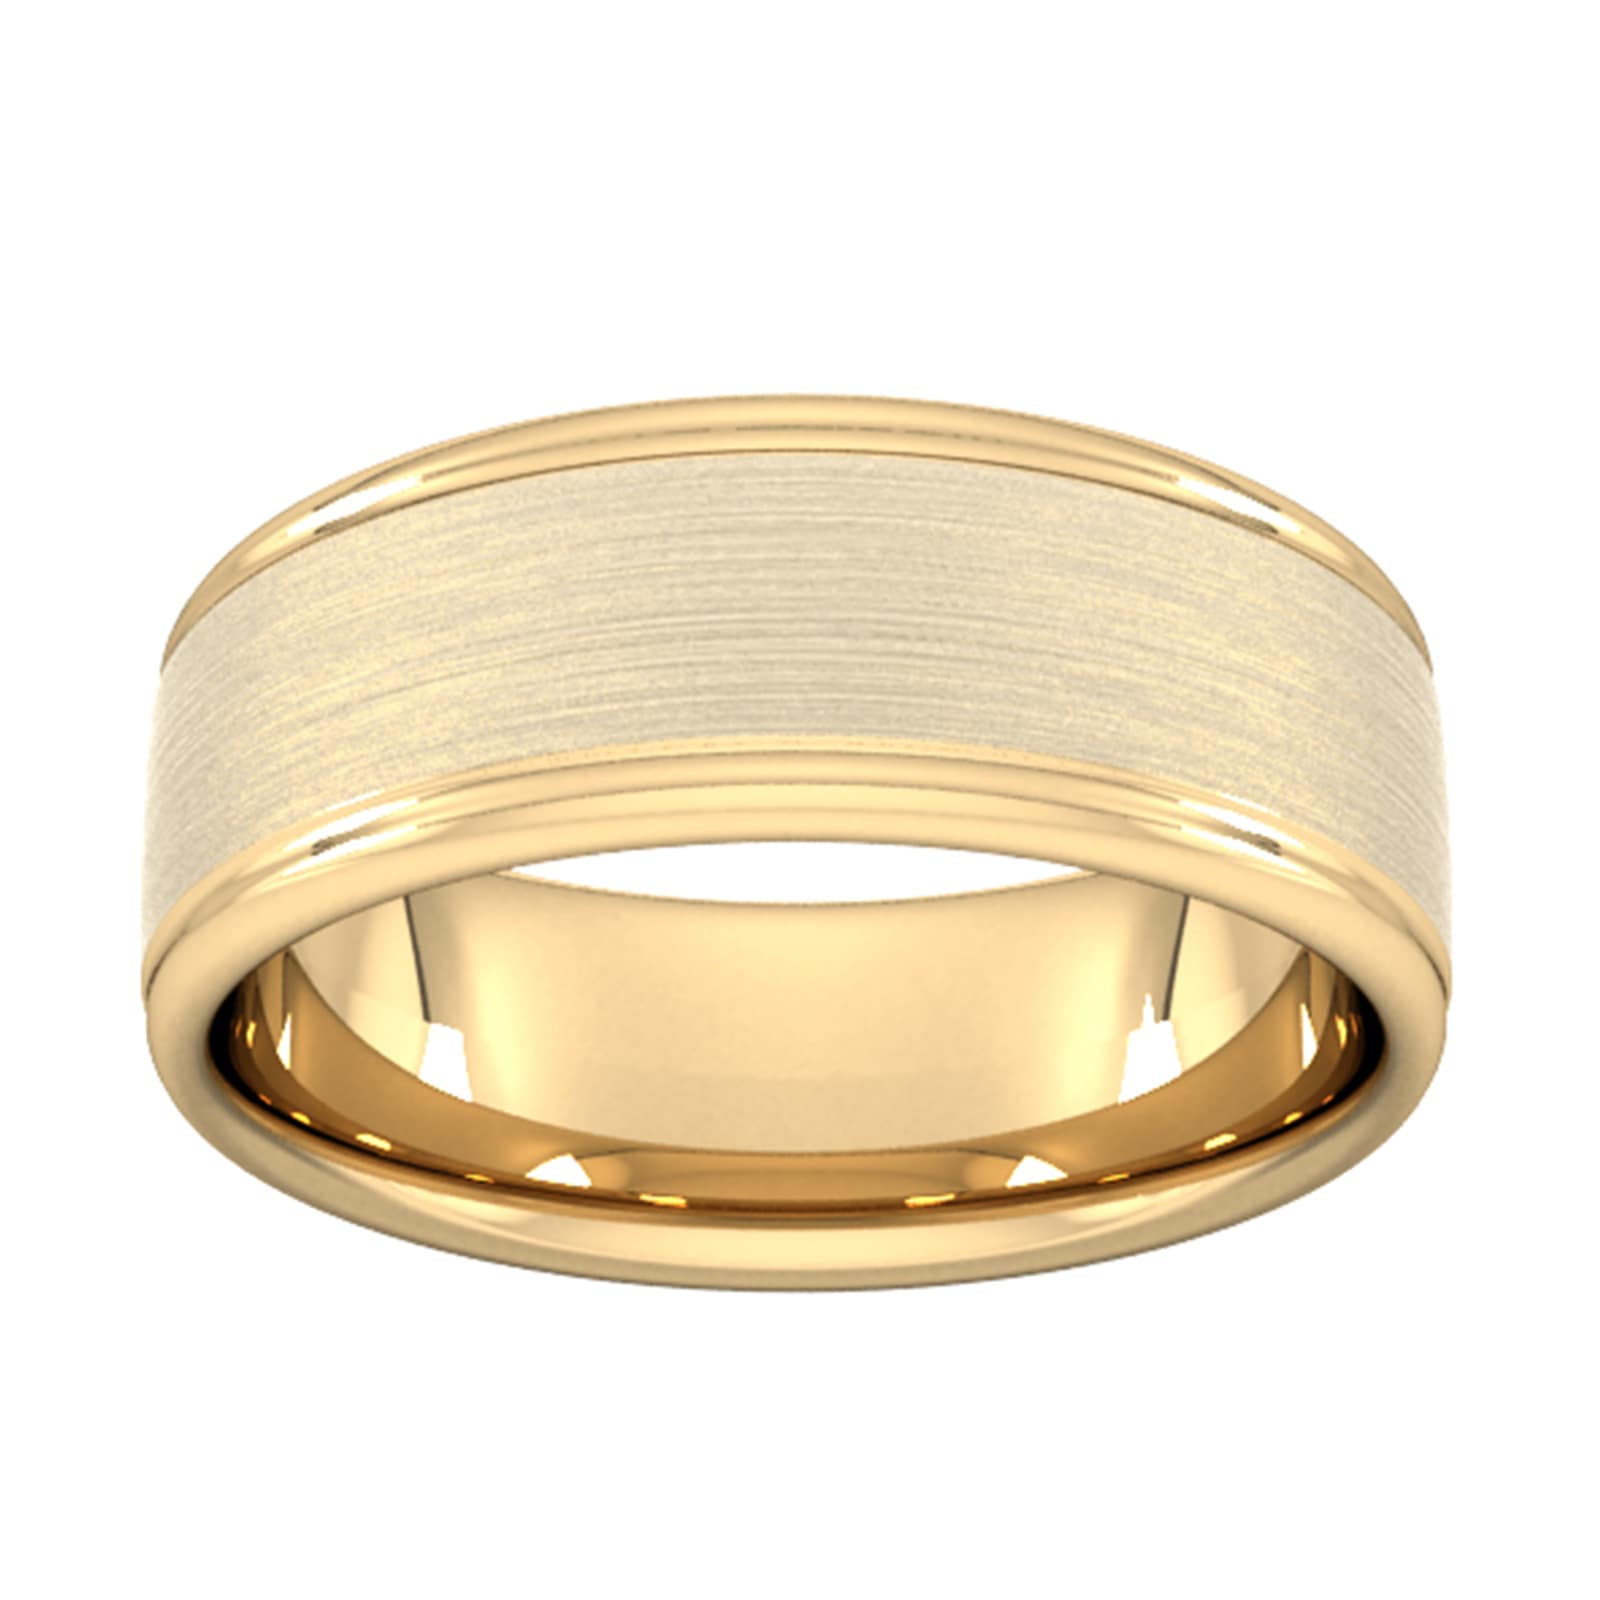 8mm D Shape Standard Matt Centre With Grooves Wedding Ring In 18 Carat Yellow Gold - Ring Size I